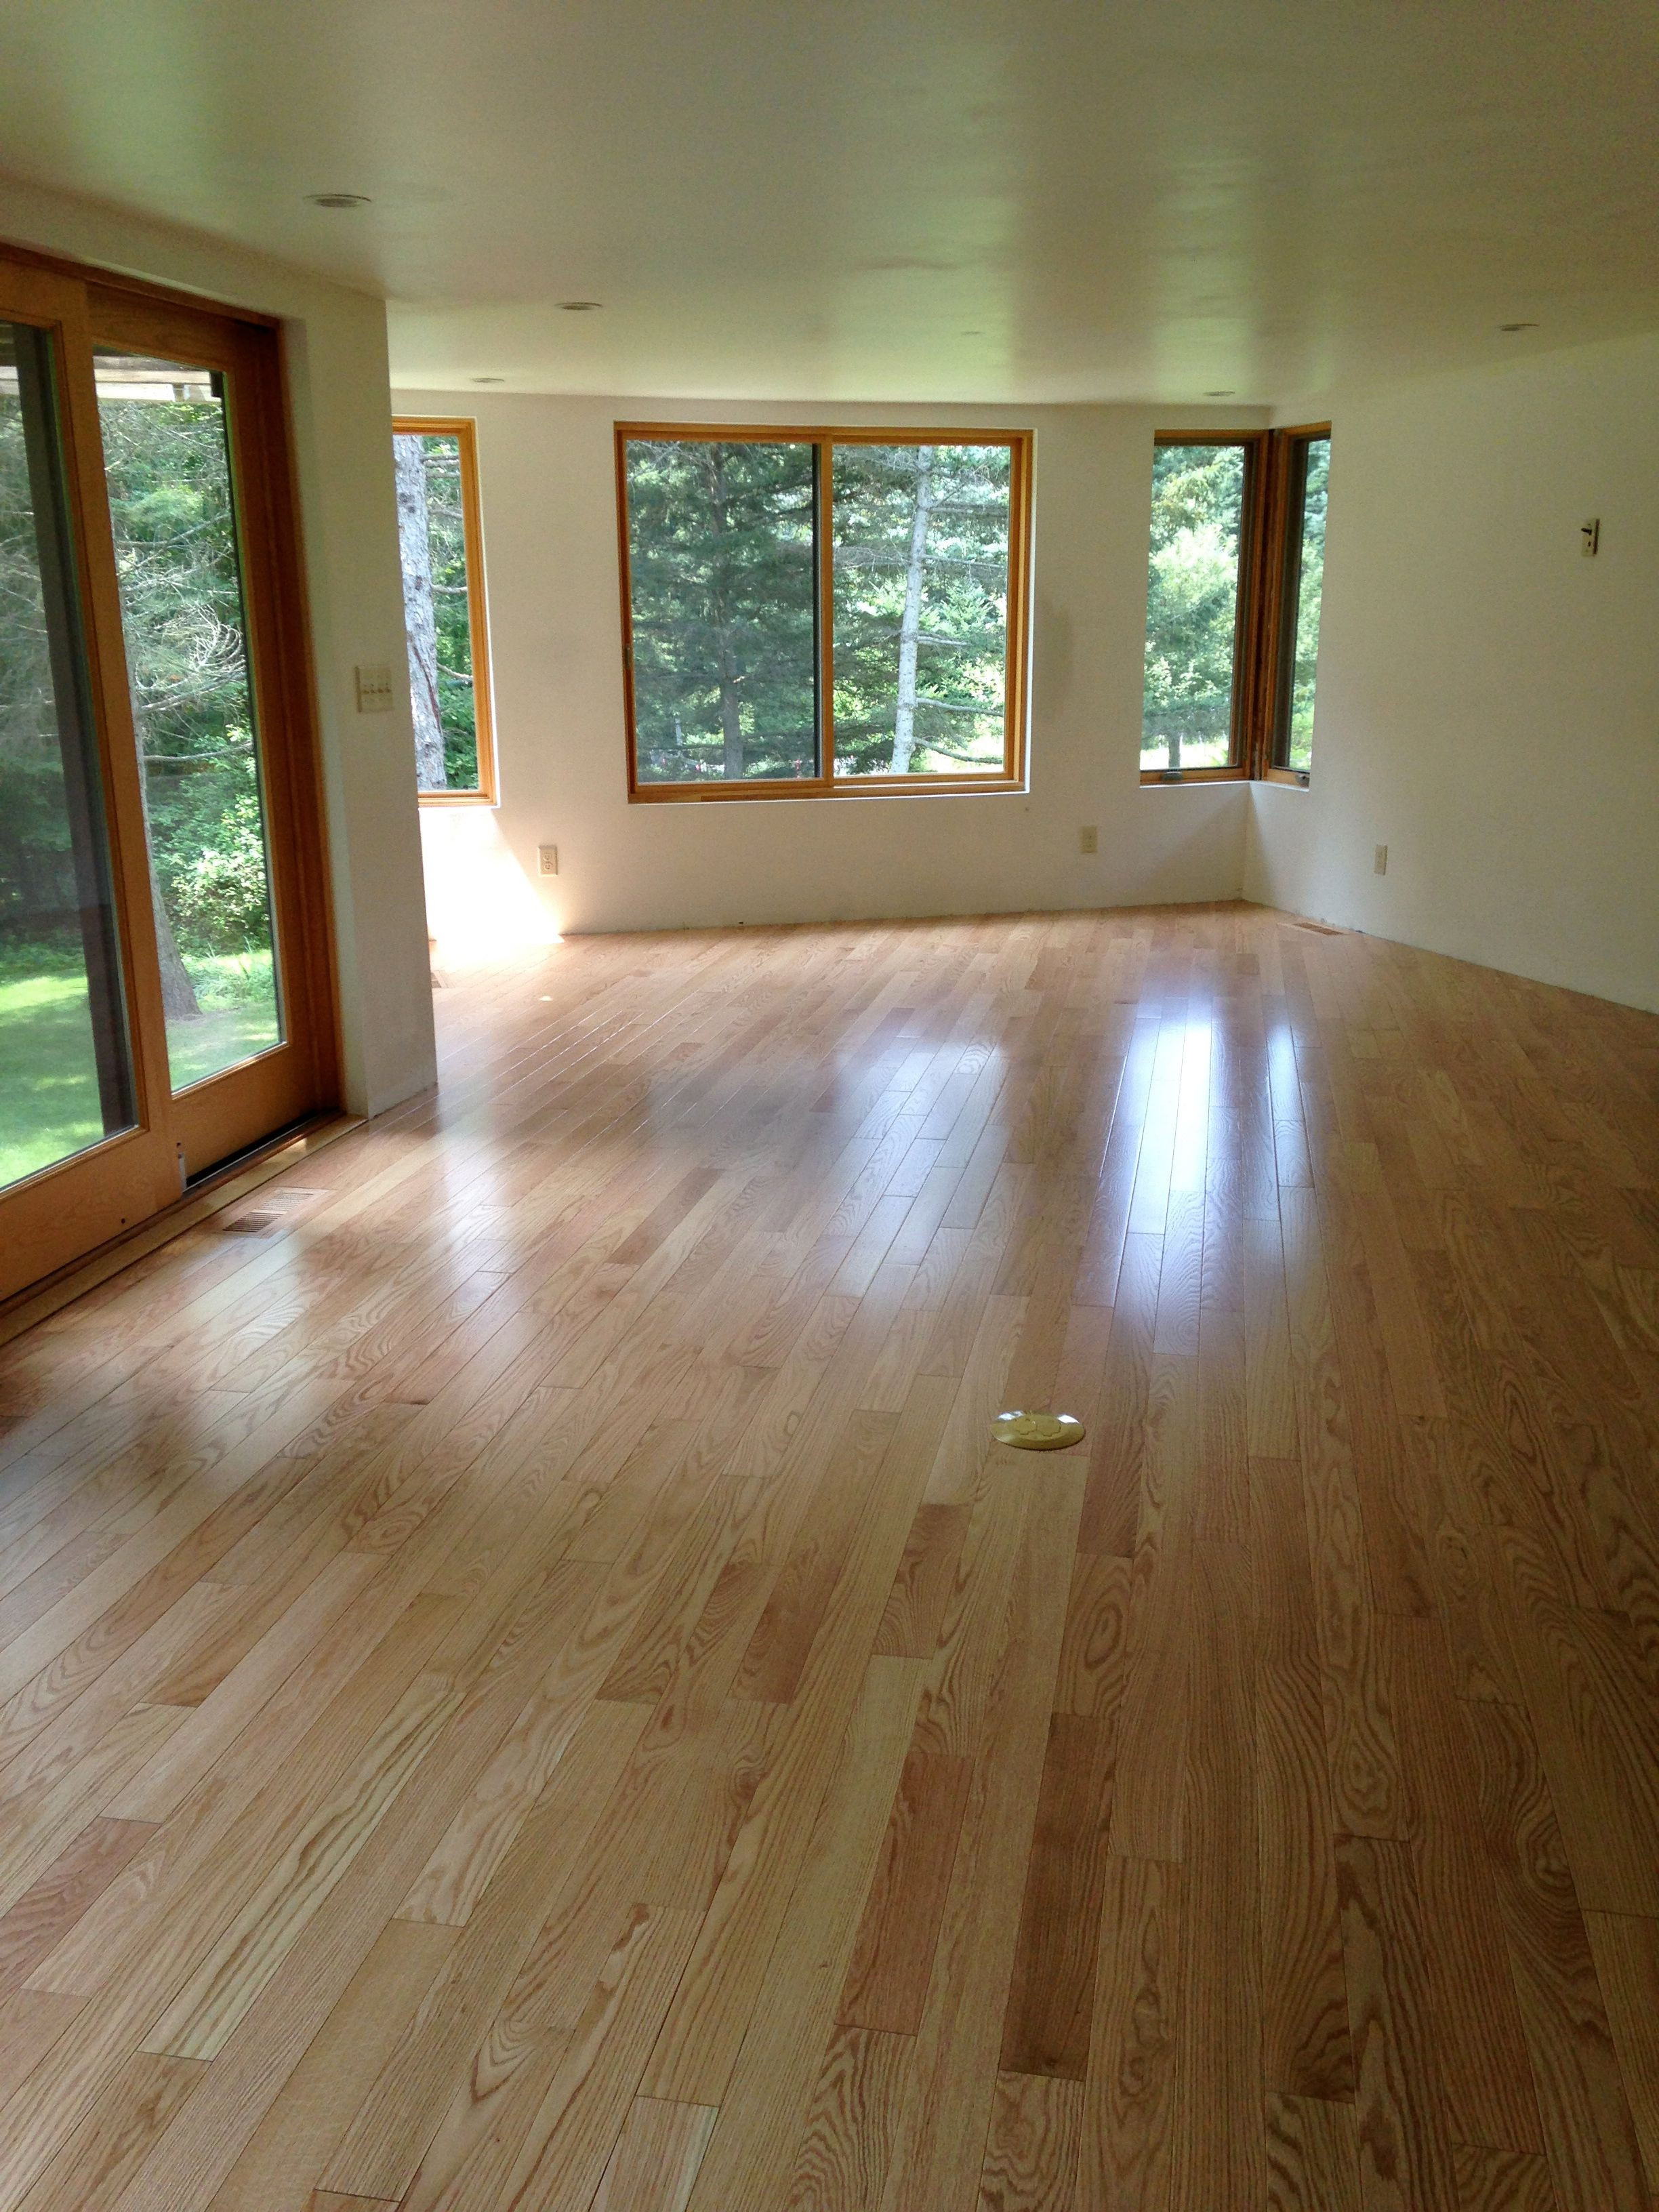 16 Lovely How Much Does It Cost to Have Hardwood Floors Refinished 2024 free download how much does it cost to have hardwood floors refinished of wood floor refinishing floor plan ideas with 21 photos of the wood floor refinishing